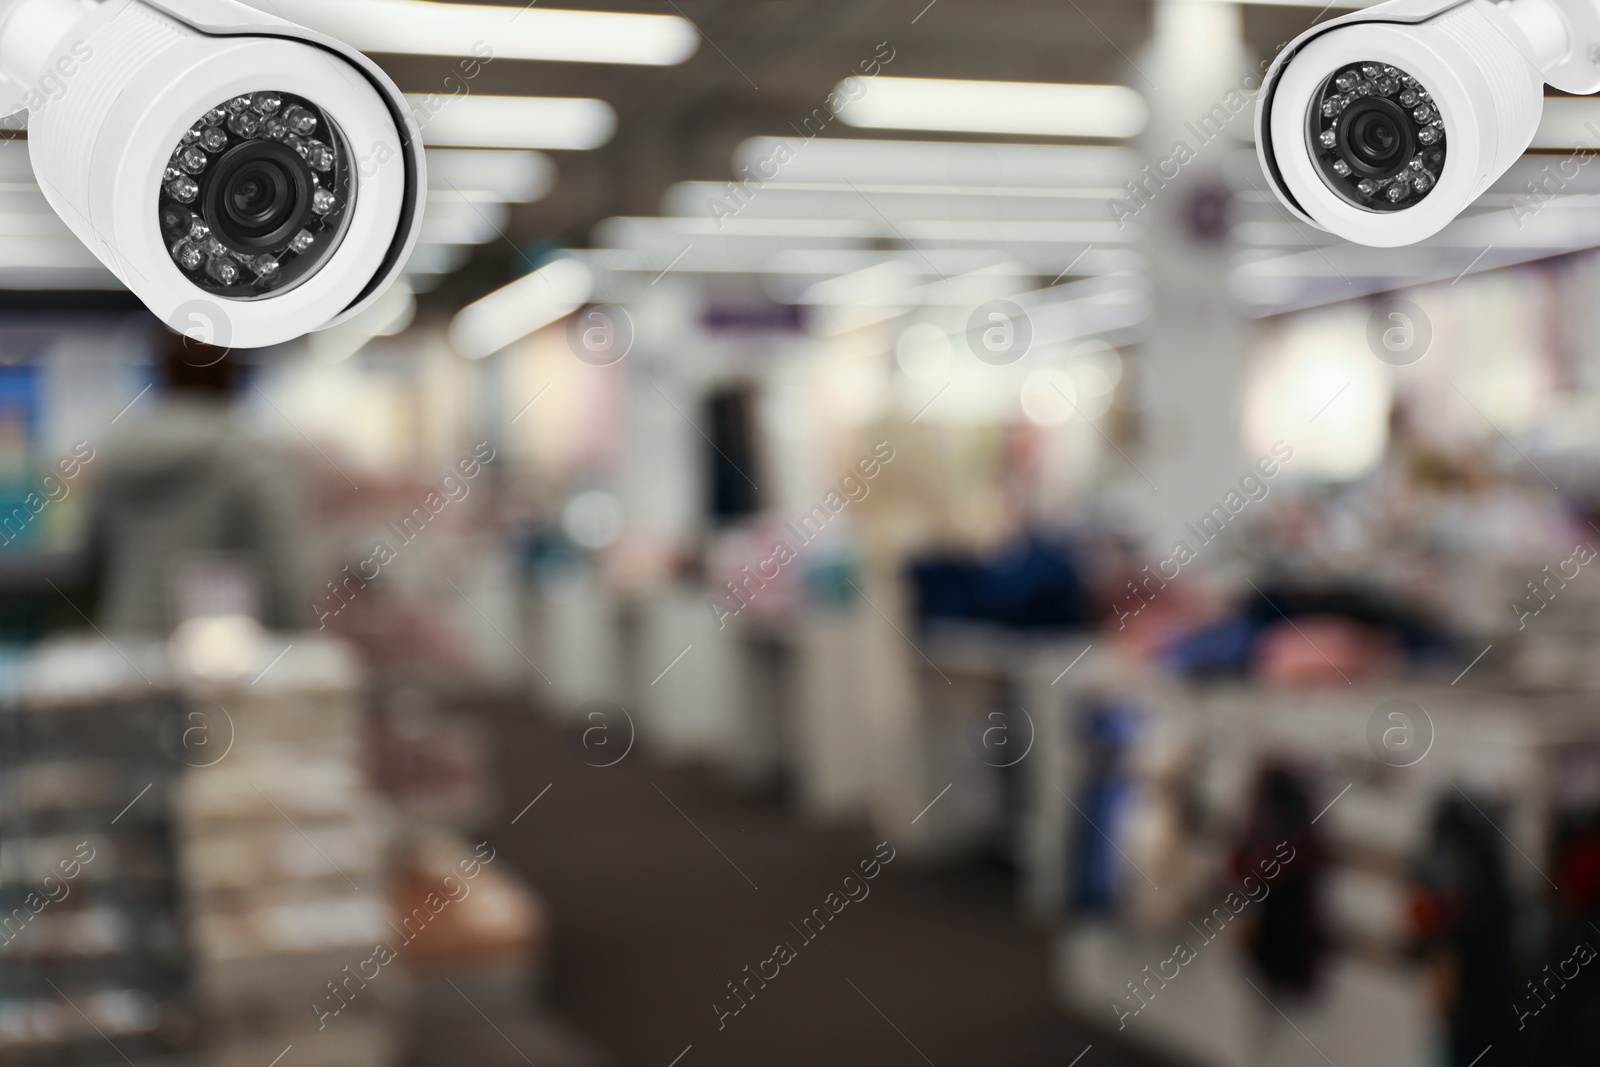 Image of Modern CCTV security cameras in shopping mall. Guard equipment